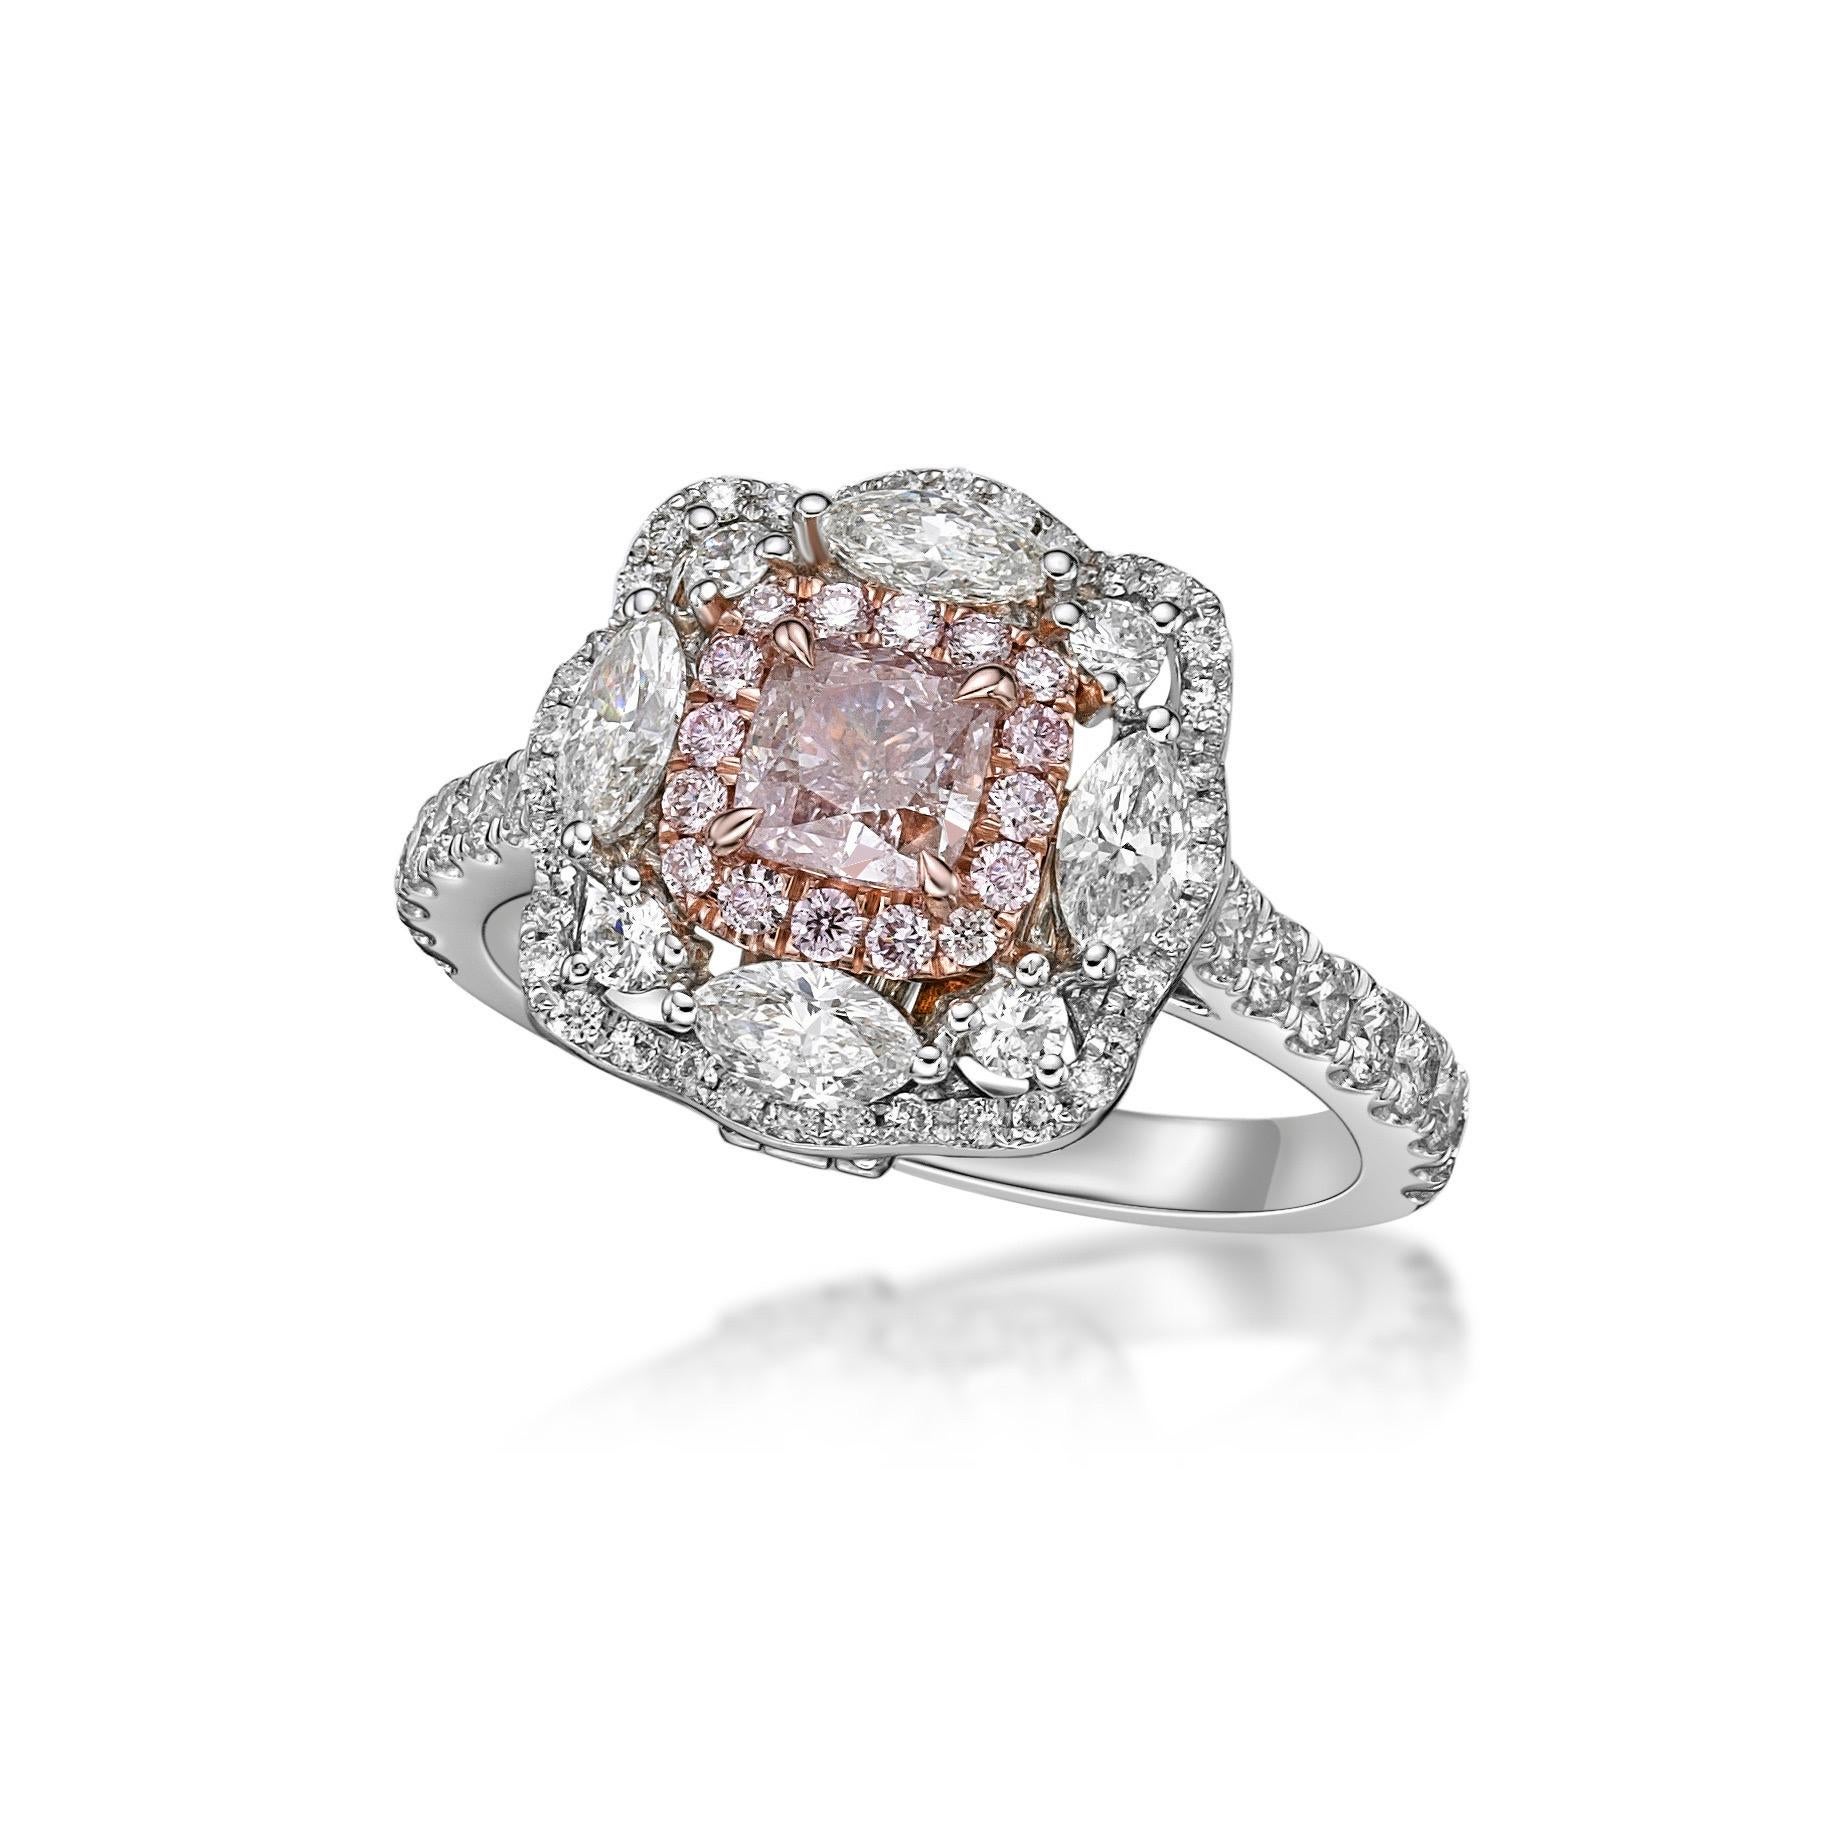 Center: Gia natural fancy pink .55ct
4 marquise .52
additional .76ct diamonds 
From The Vault at Emilio Jewelry Located on New York's iconic Fifth Avenue,
Showcasing a very special and rare Gia certified natural pink diamond set in the center .55ct